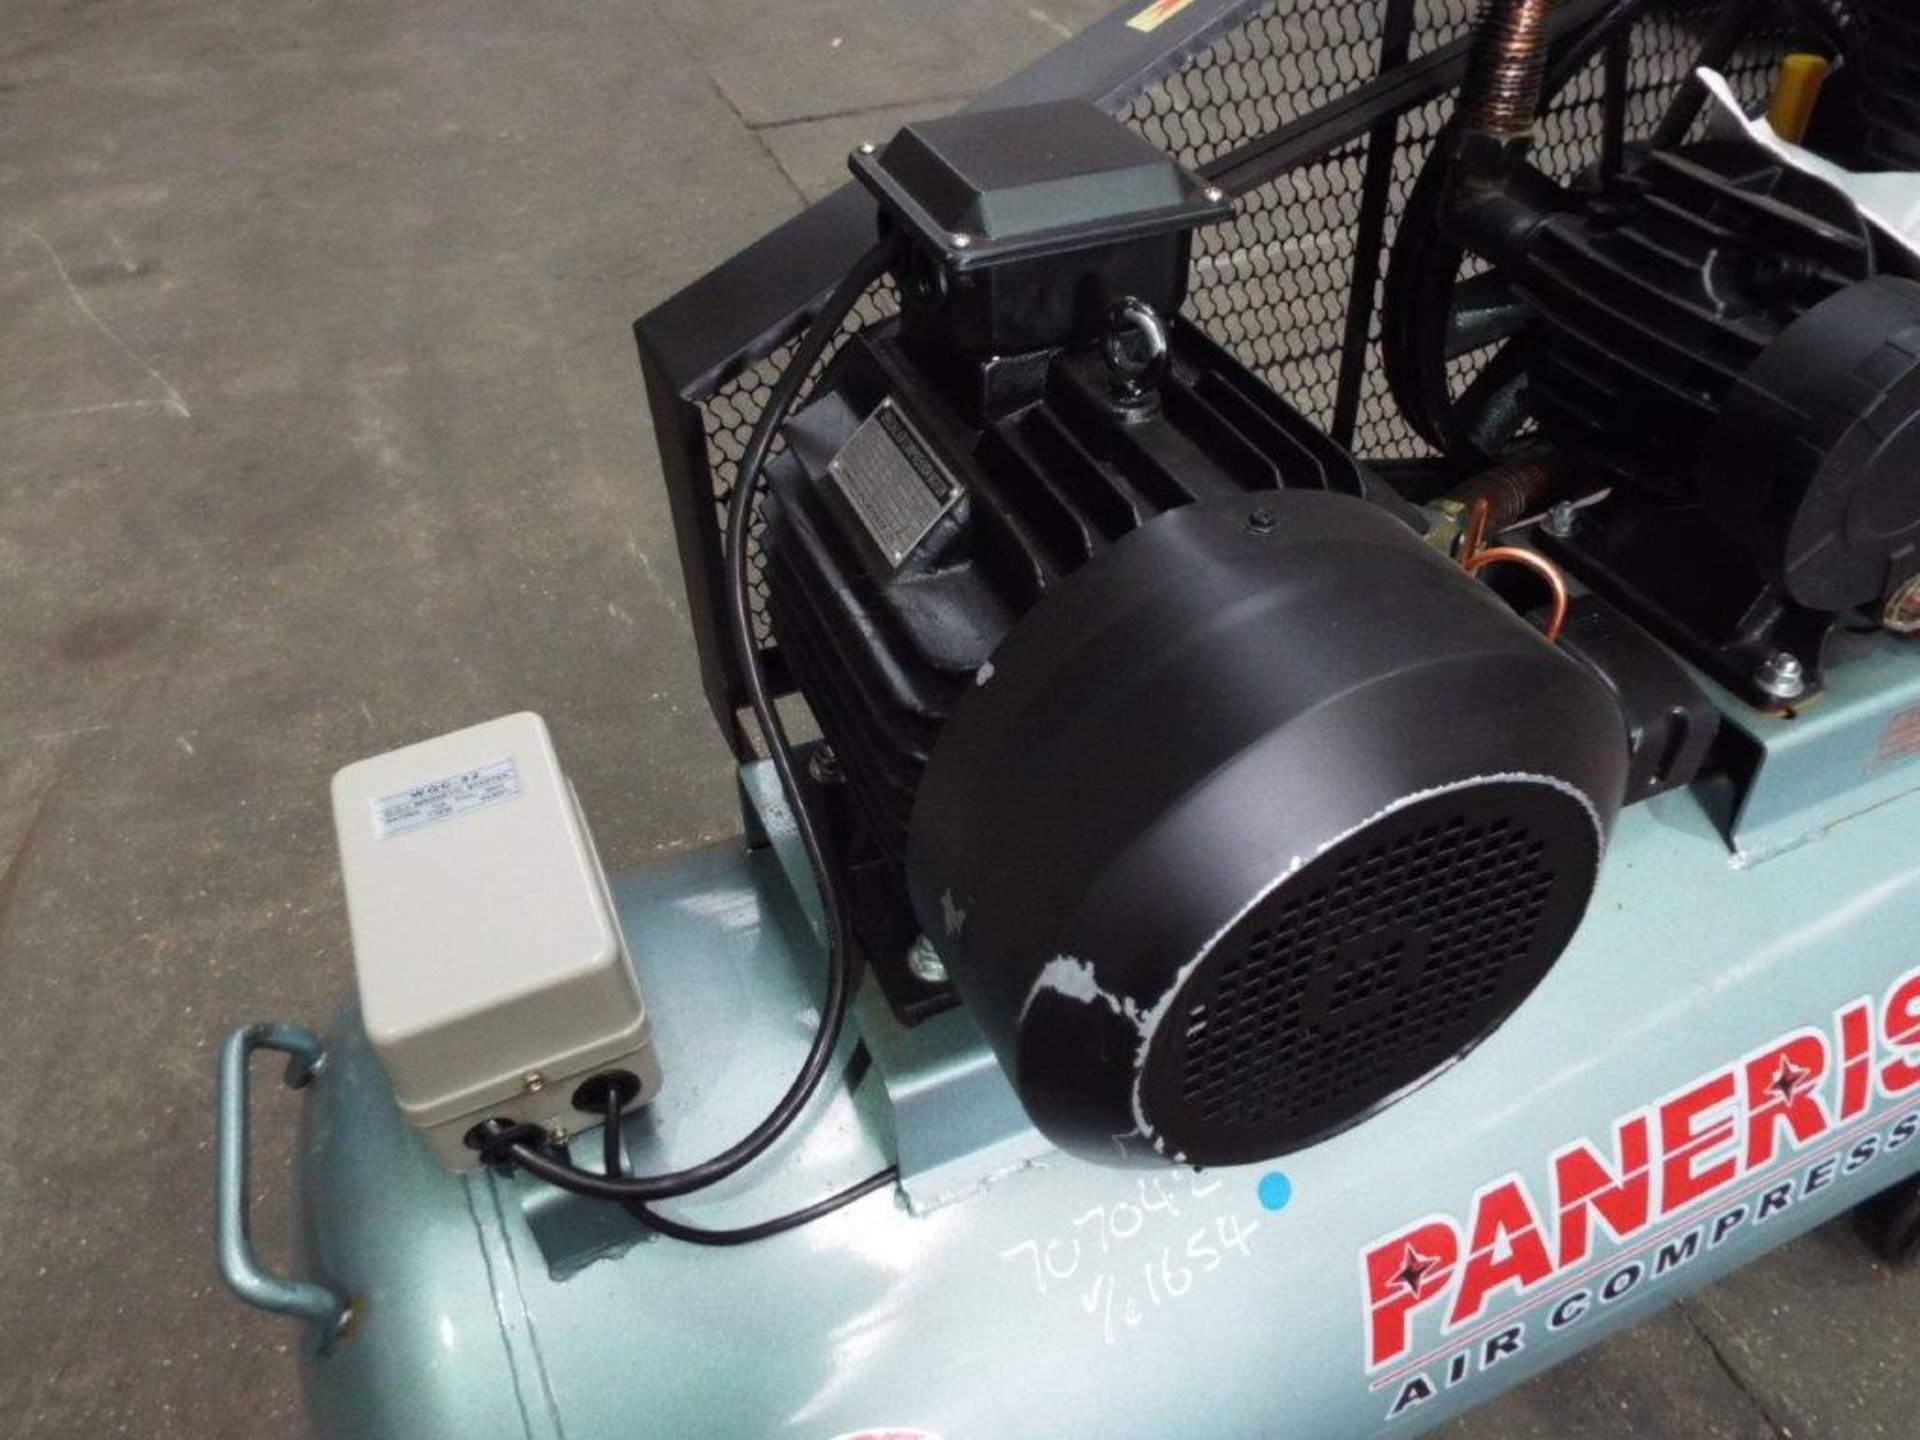 Unused Panerise PW3090A-300 10HP Air Compressor - Image 7 of 14